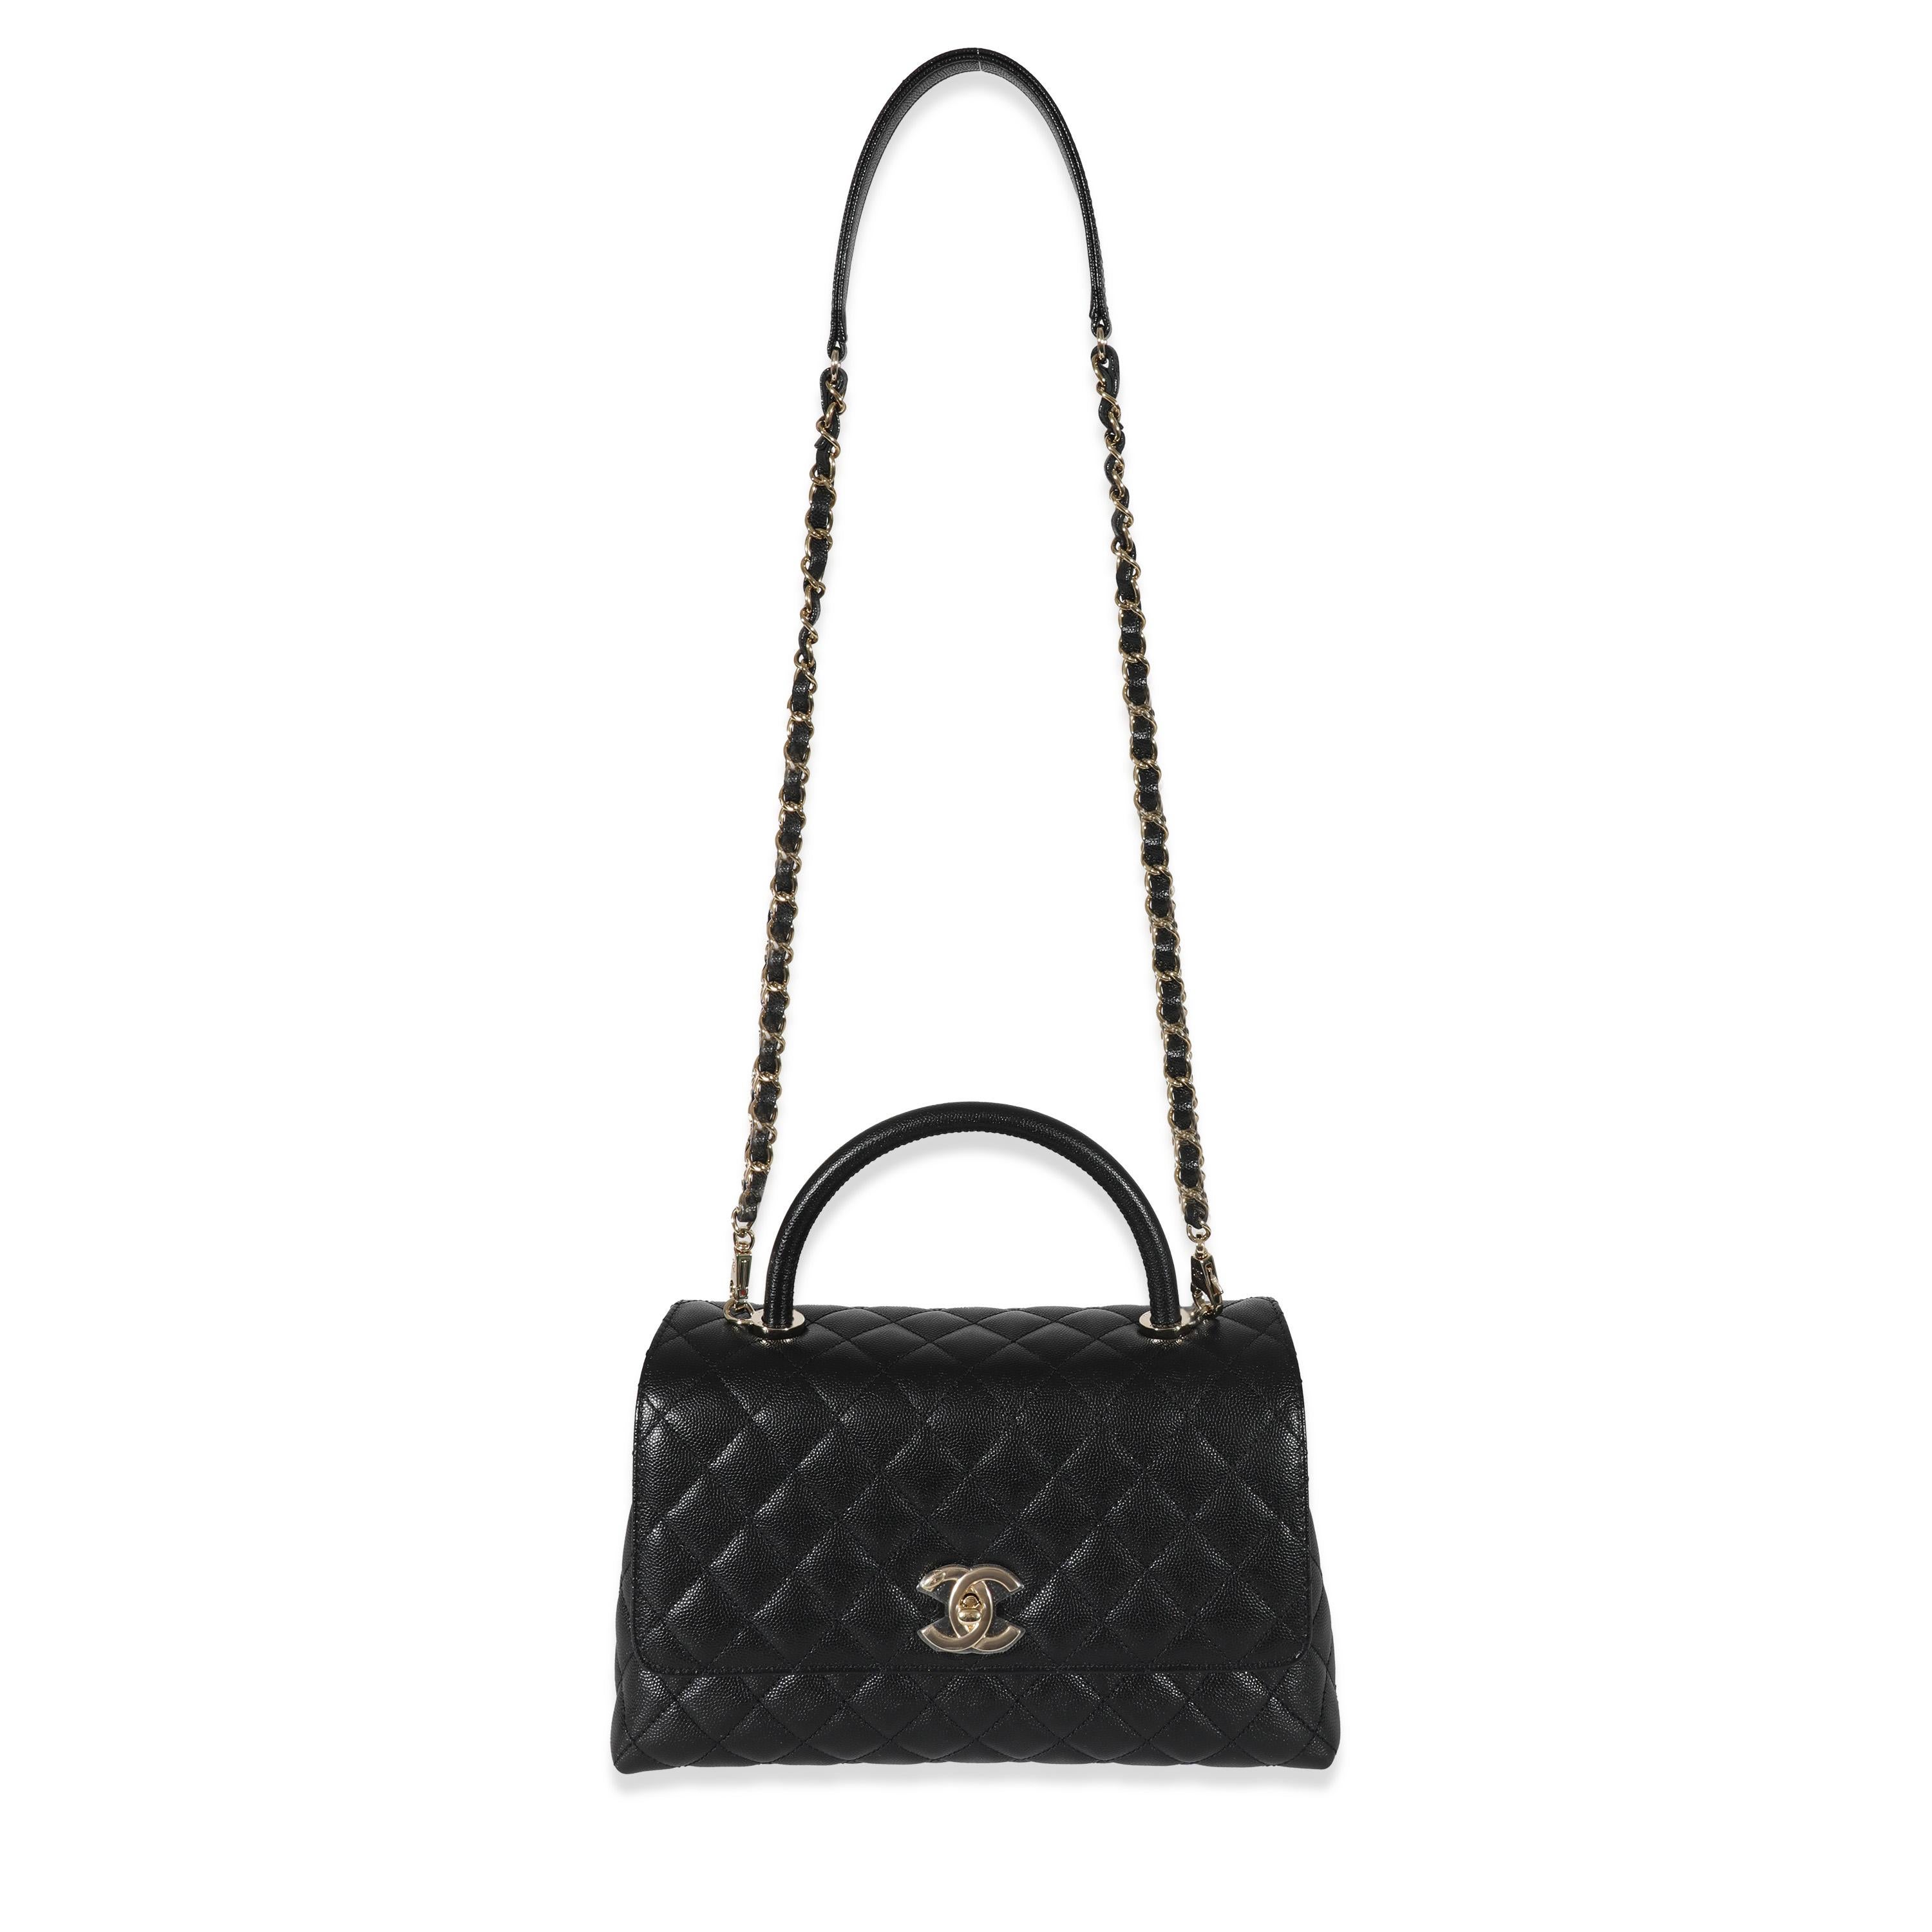 Listing Title: Chanel Black Quilted Caviar Medium Coco Top Handle Flap Bag
SKU: 130944
Condition: Pre-owned 
Condition Description: Intrinsically Chanel, the medium Coco top handle bag was named after the maison's founder. Introduced in 2015, the